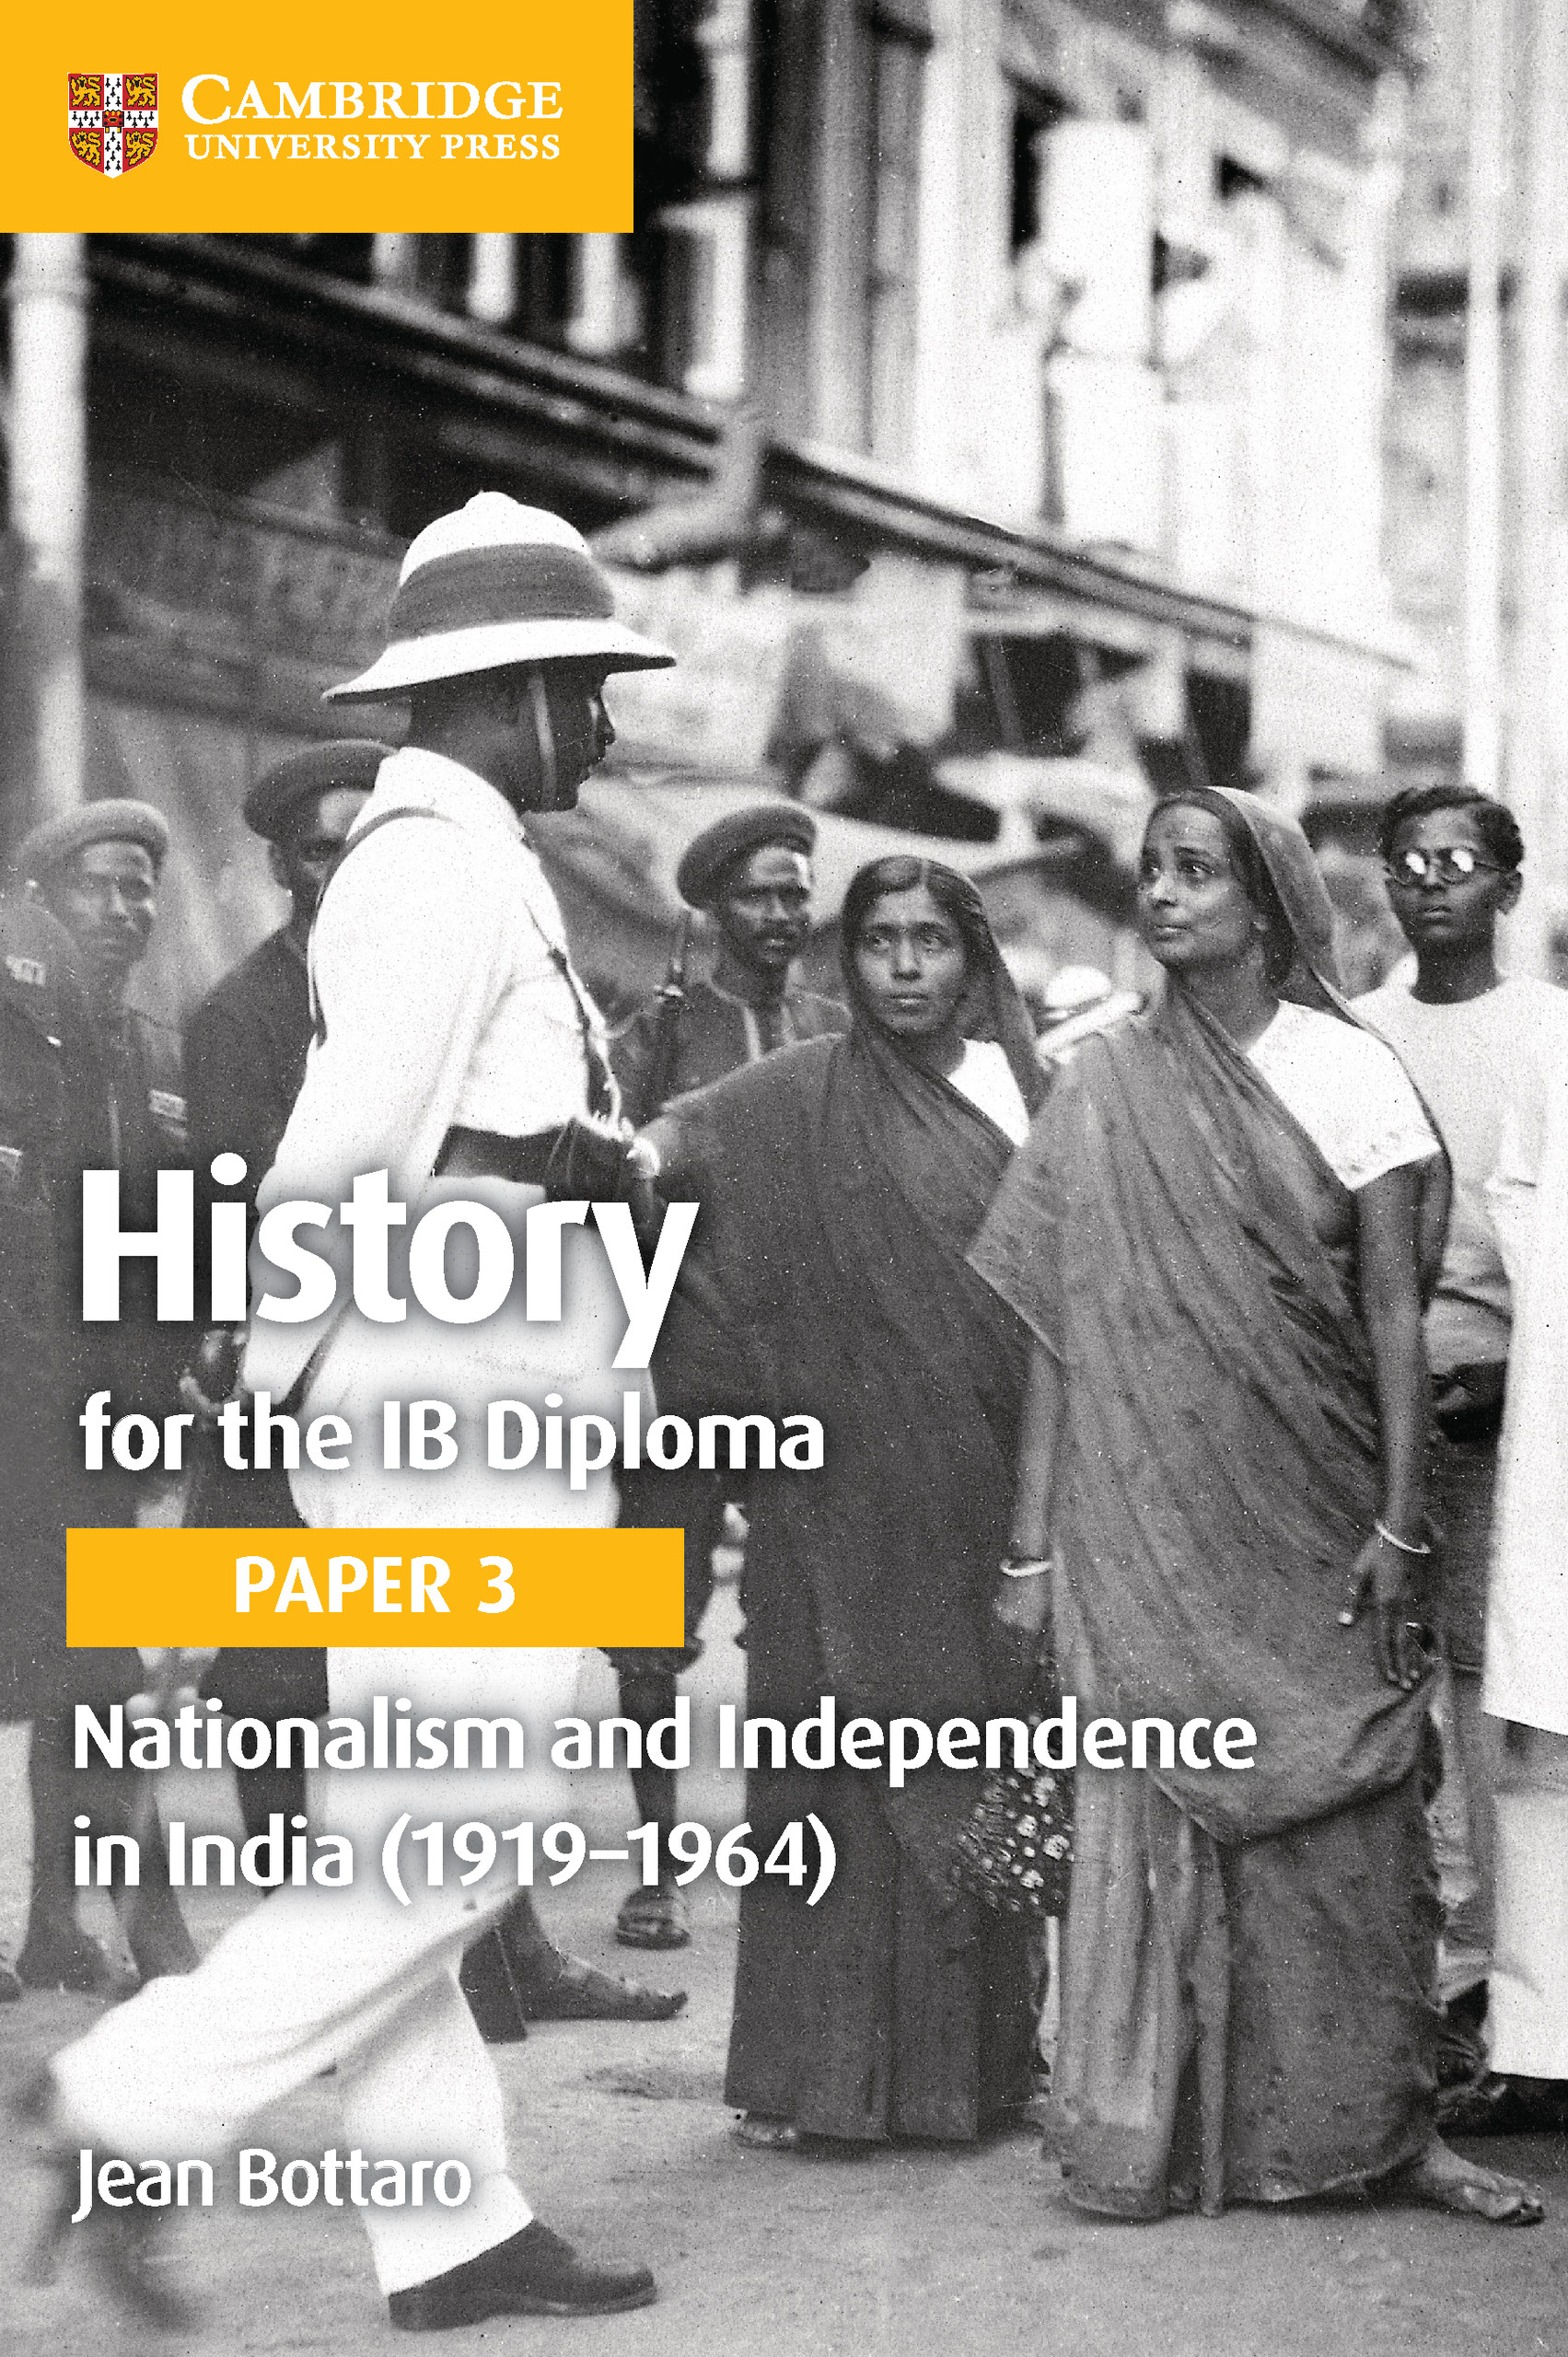 IB History Paper 3: Nationalism and independence in India